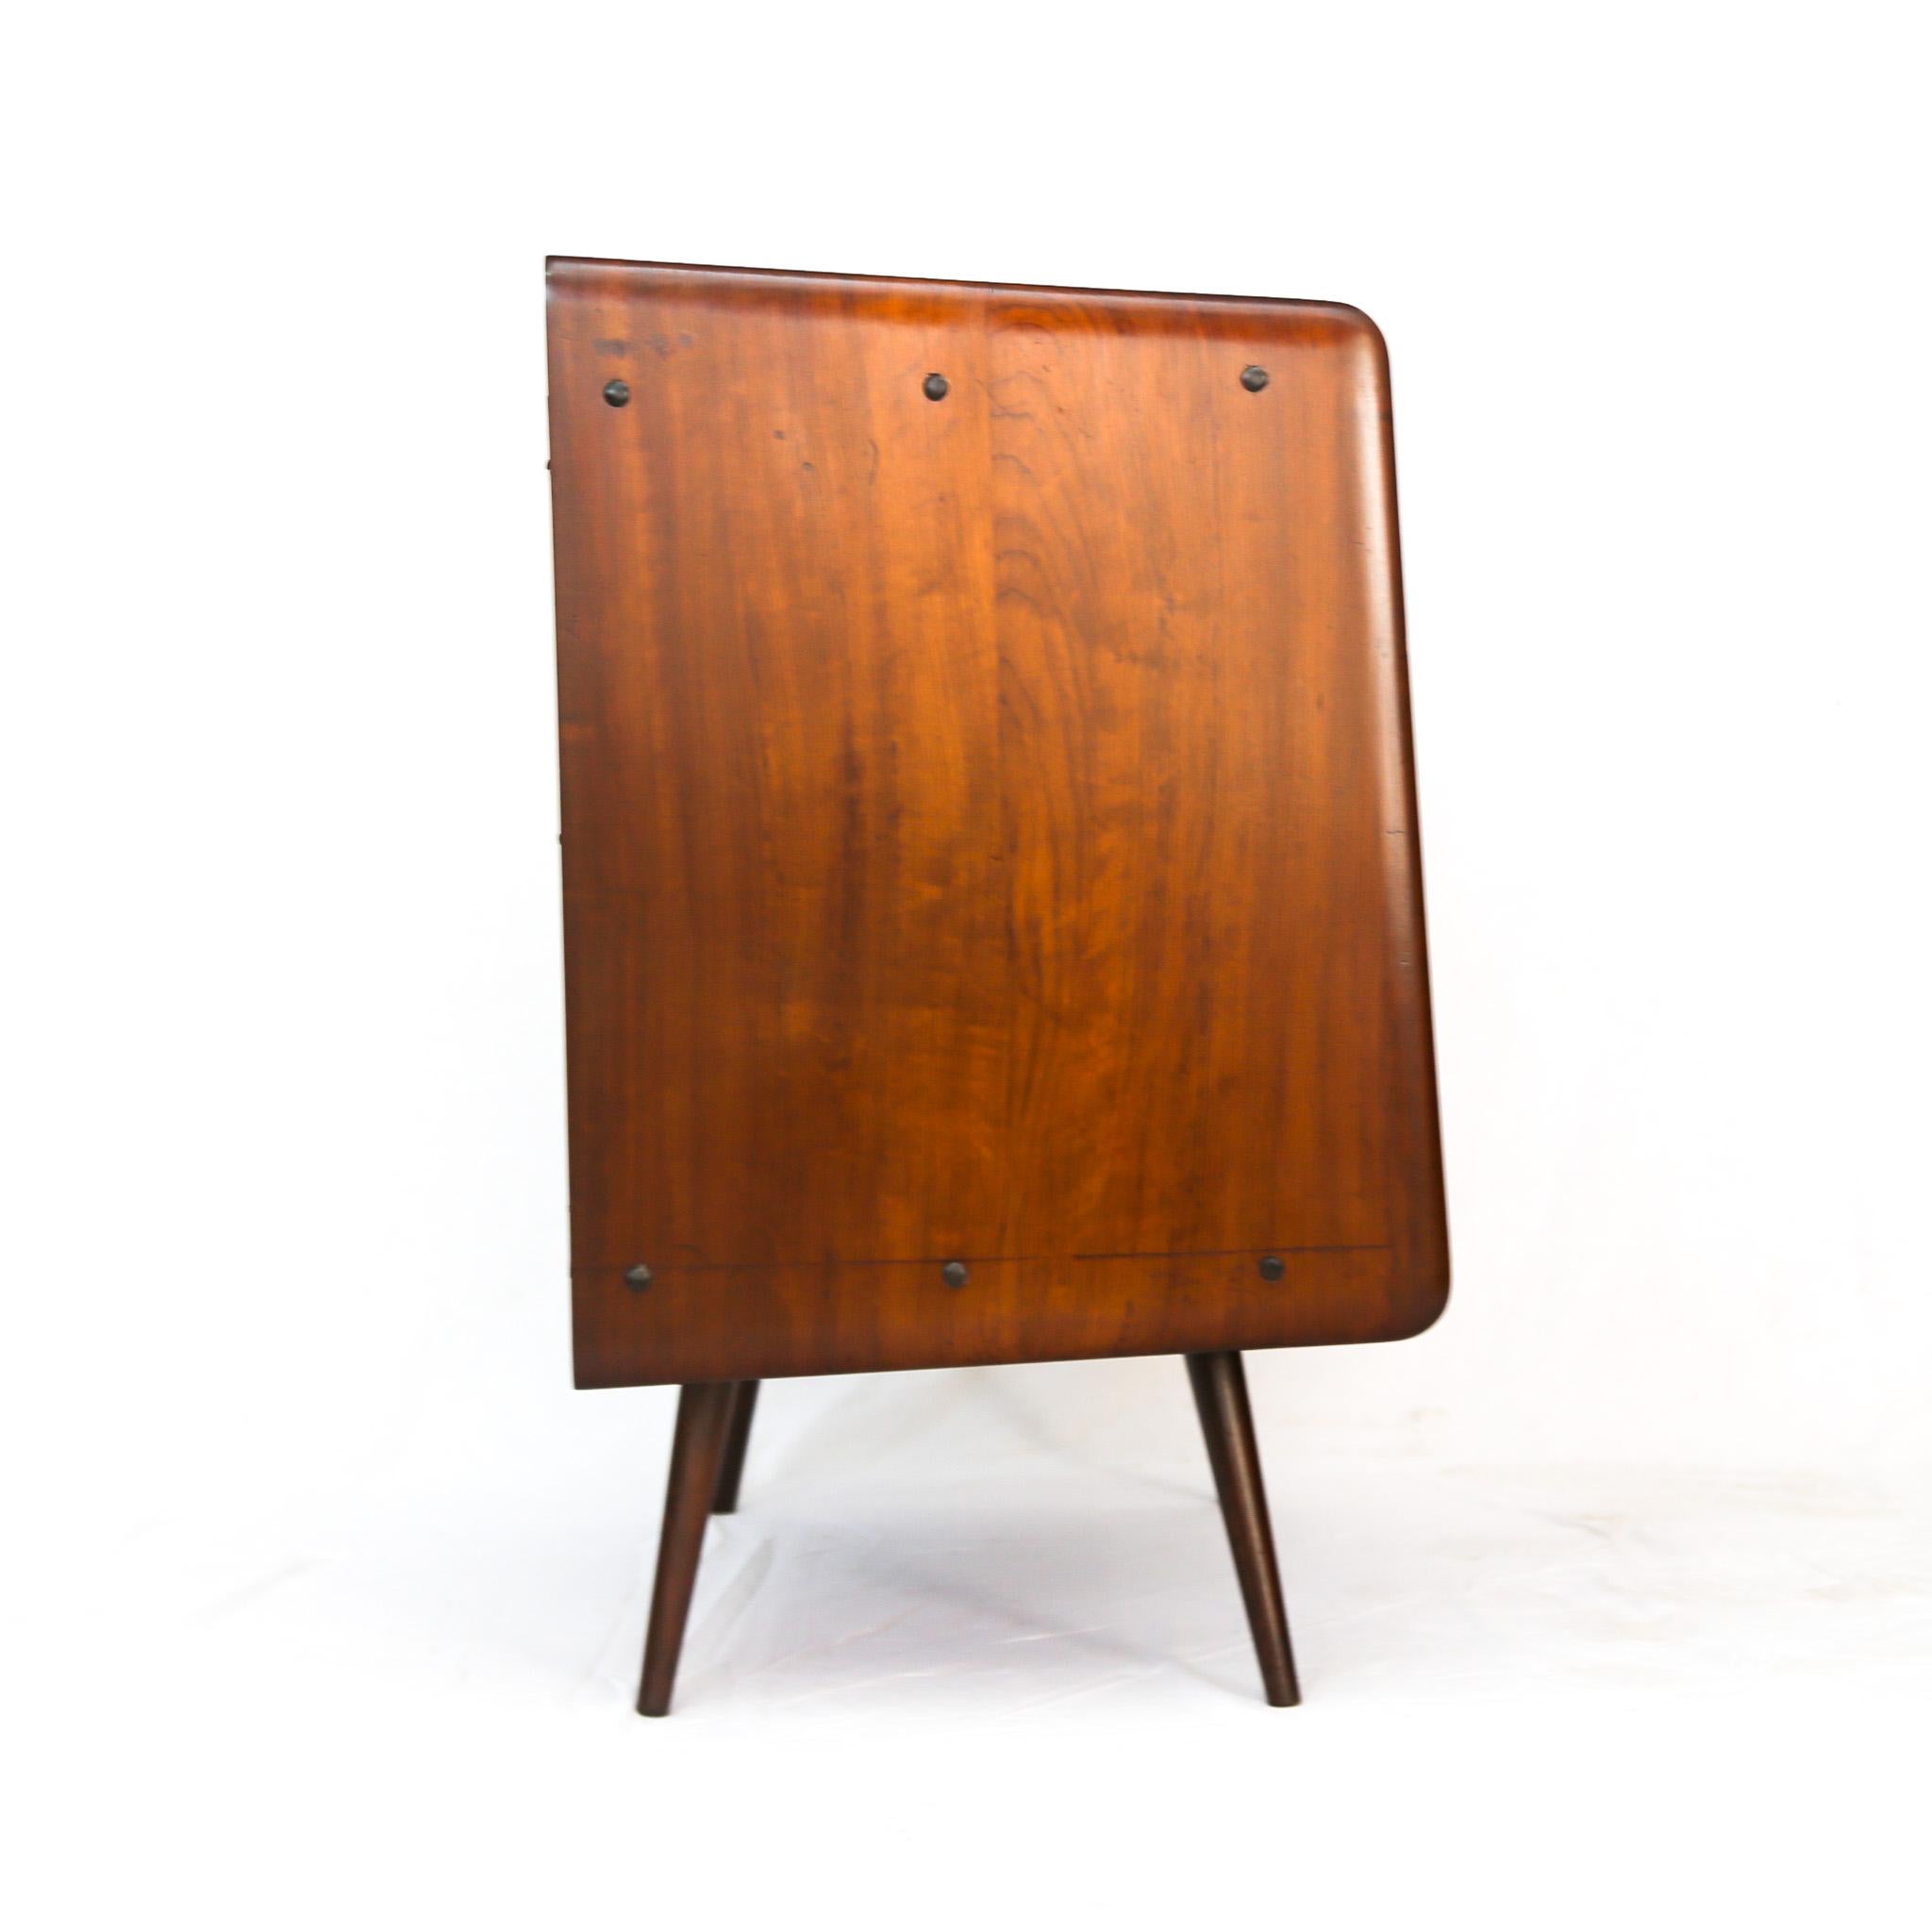 20th Century Brazilian Modern Chest of Drawers in Hardwood by Moveis Cimo, 1950s, Brazil